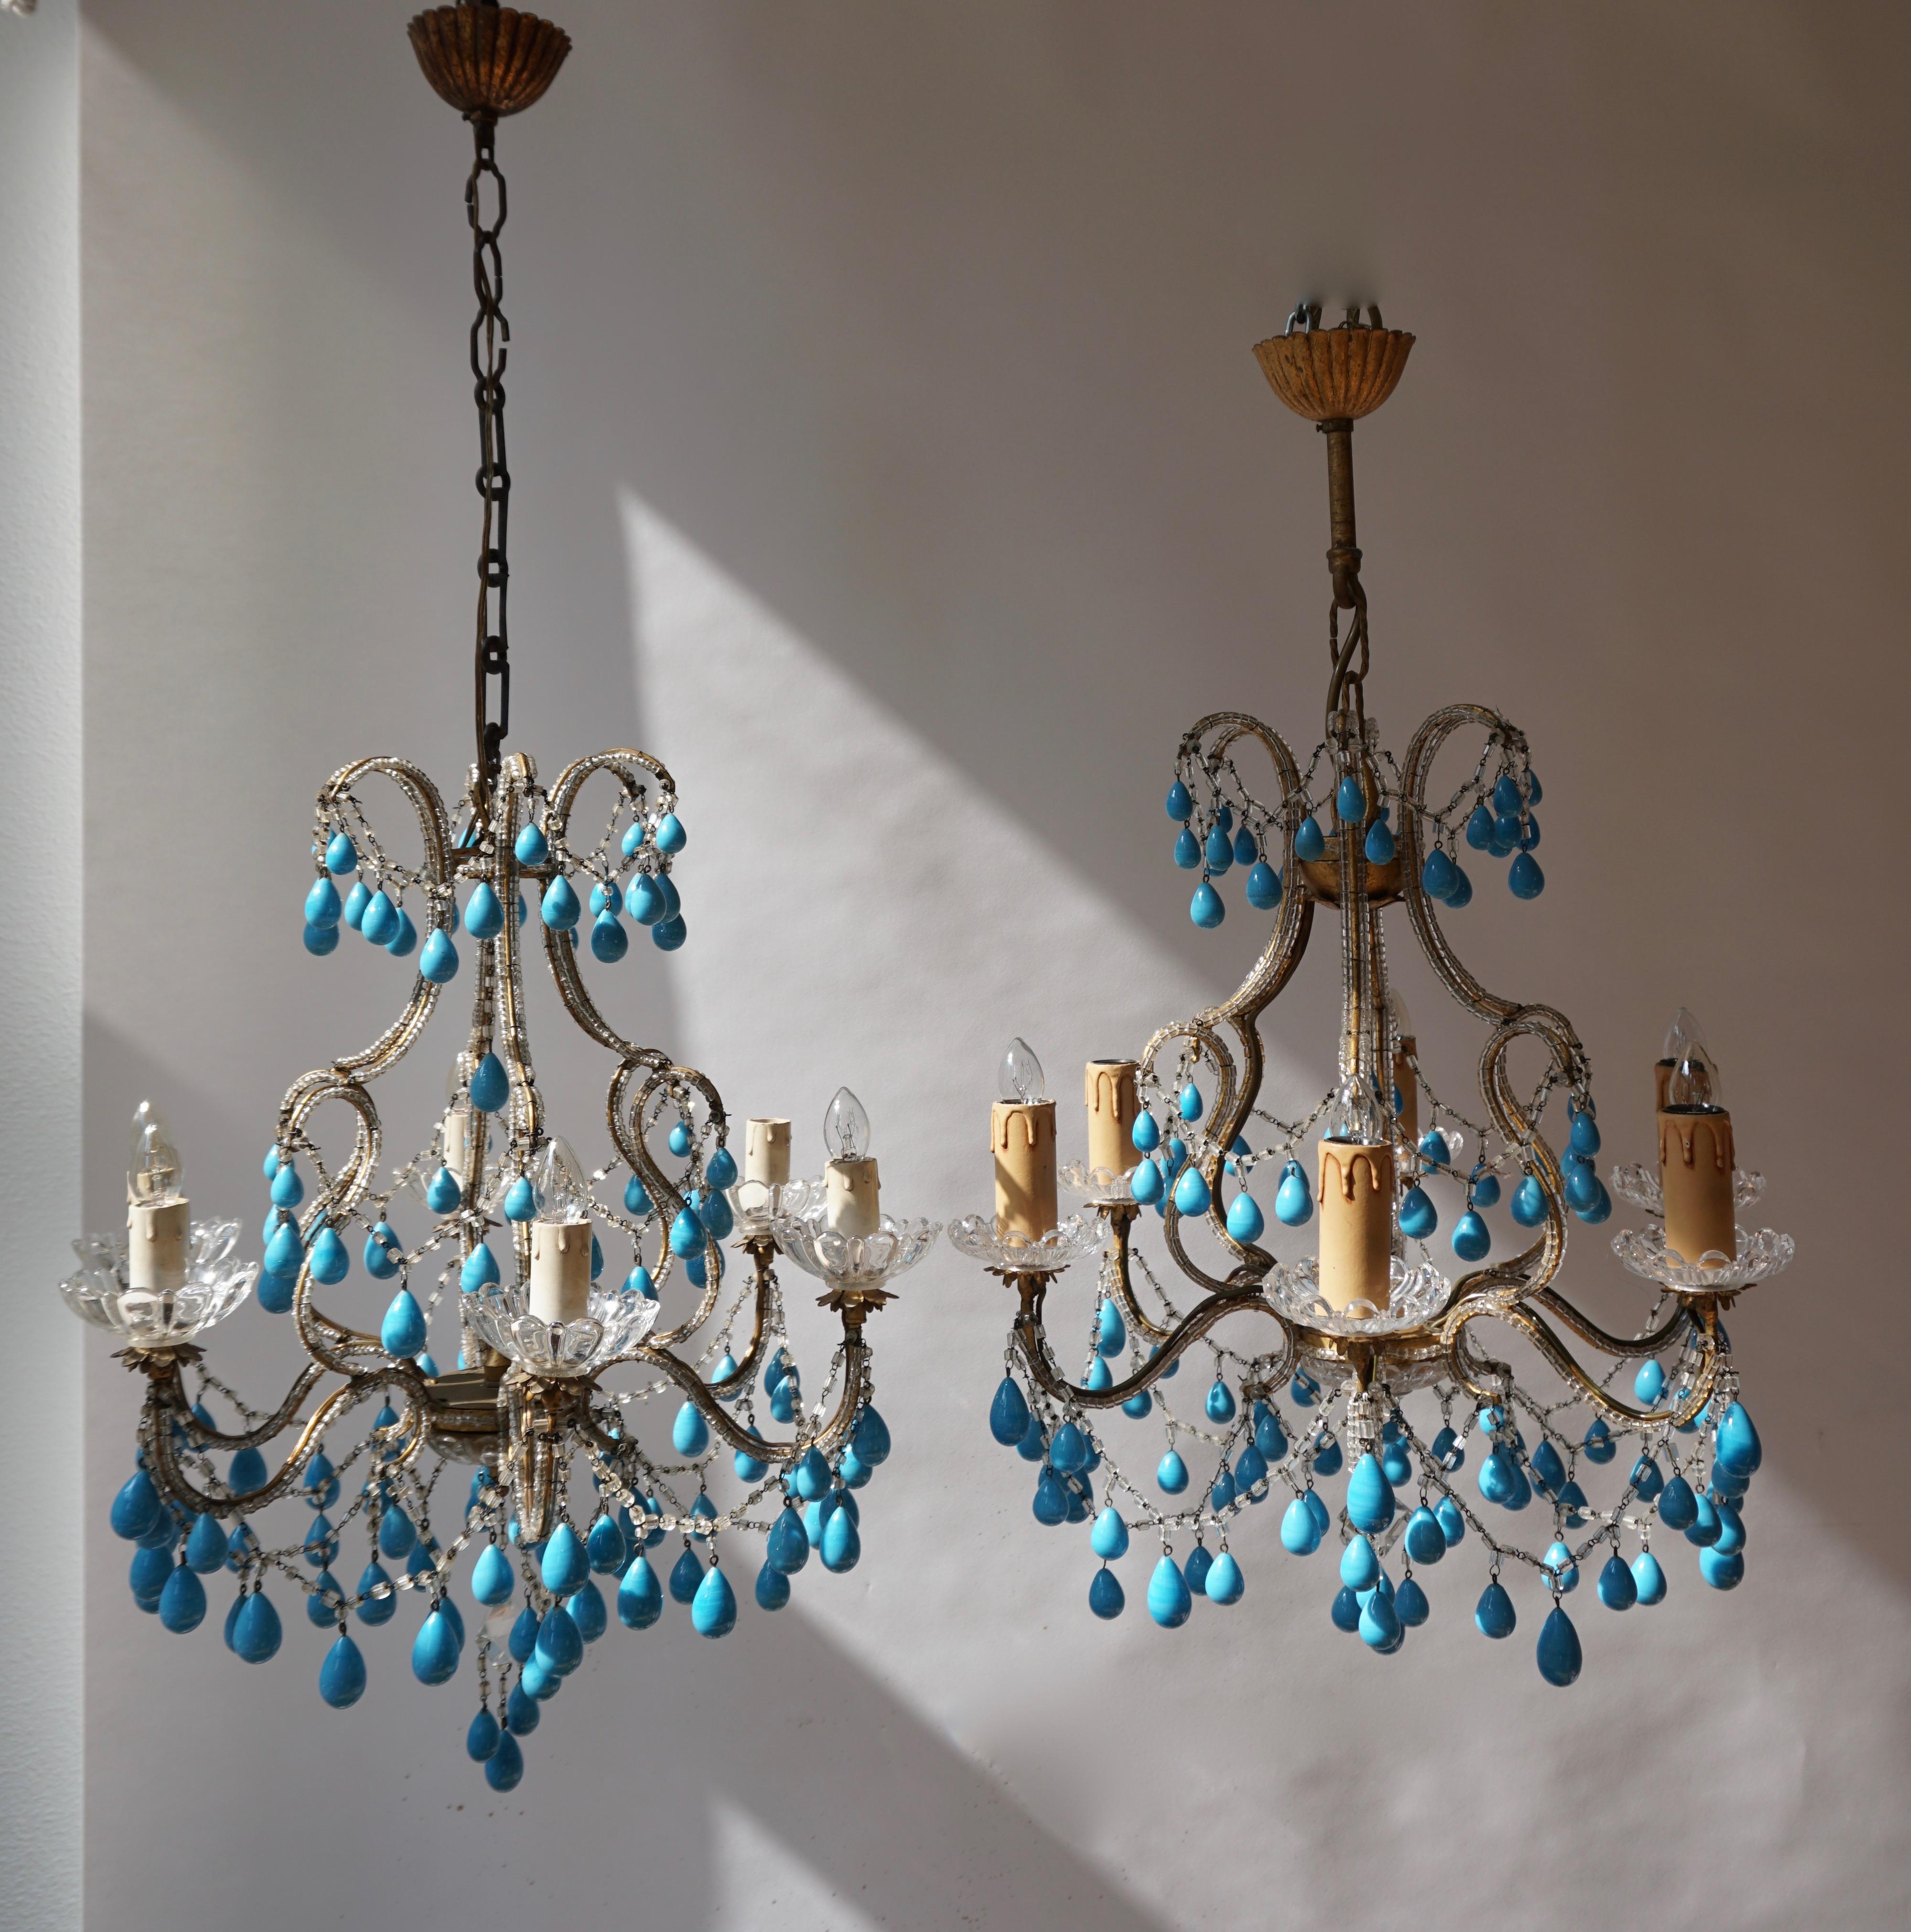 Pair of Elegant Italian Chandeliers with Turquoise Stone In Good Condition For Sale In Antwerp, BE